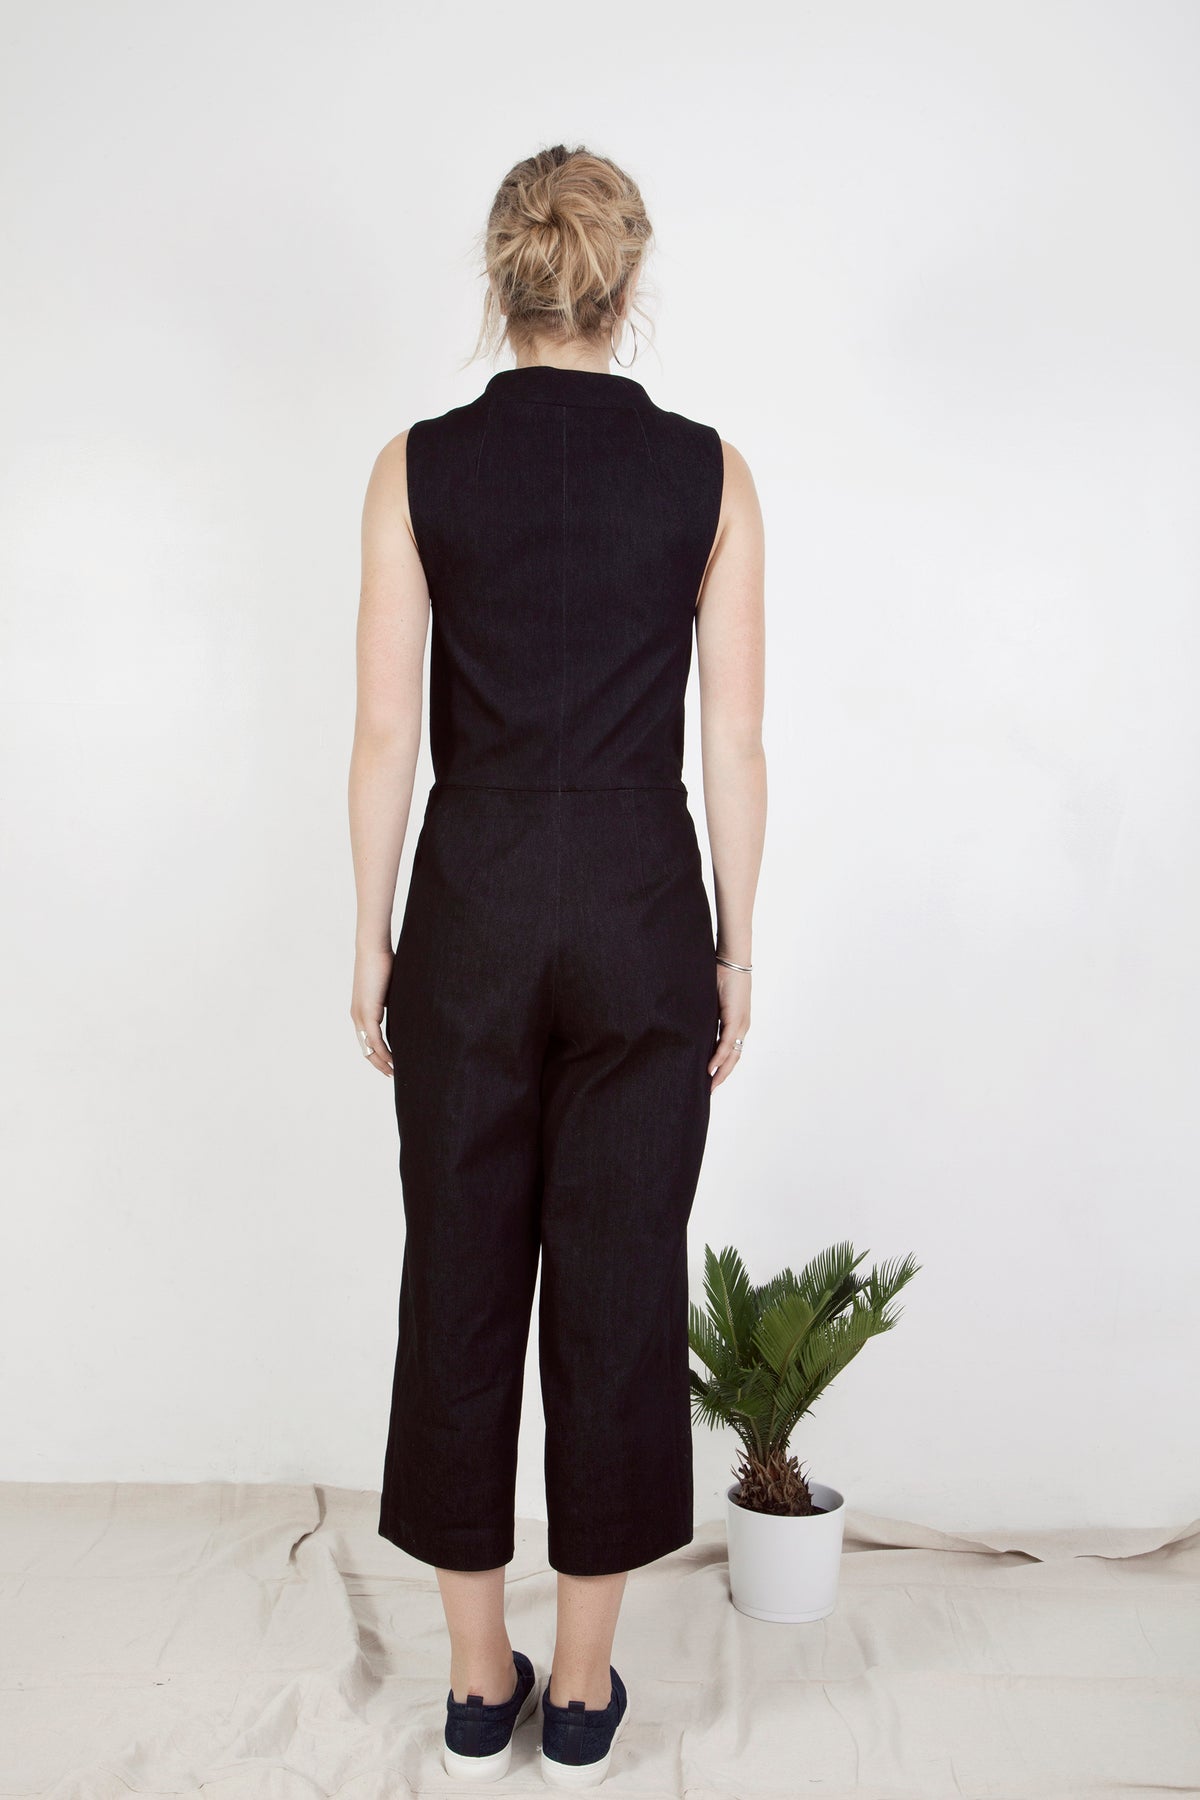 Summer Day In Tunis Jumpsuit